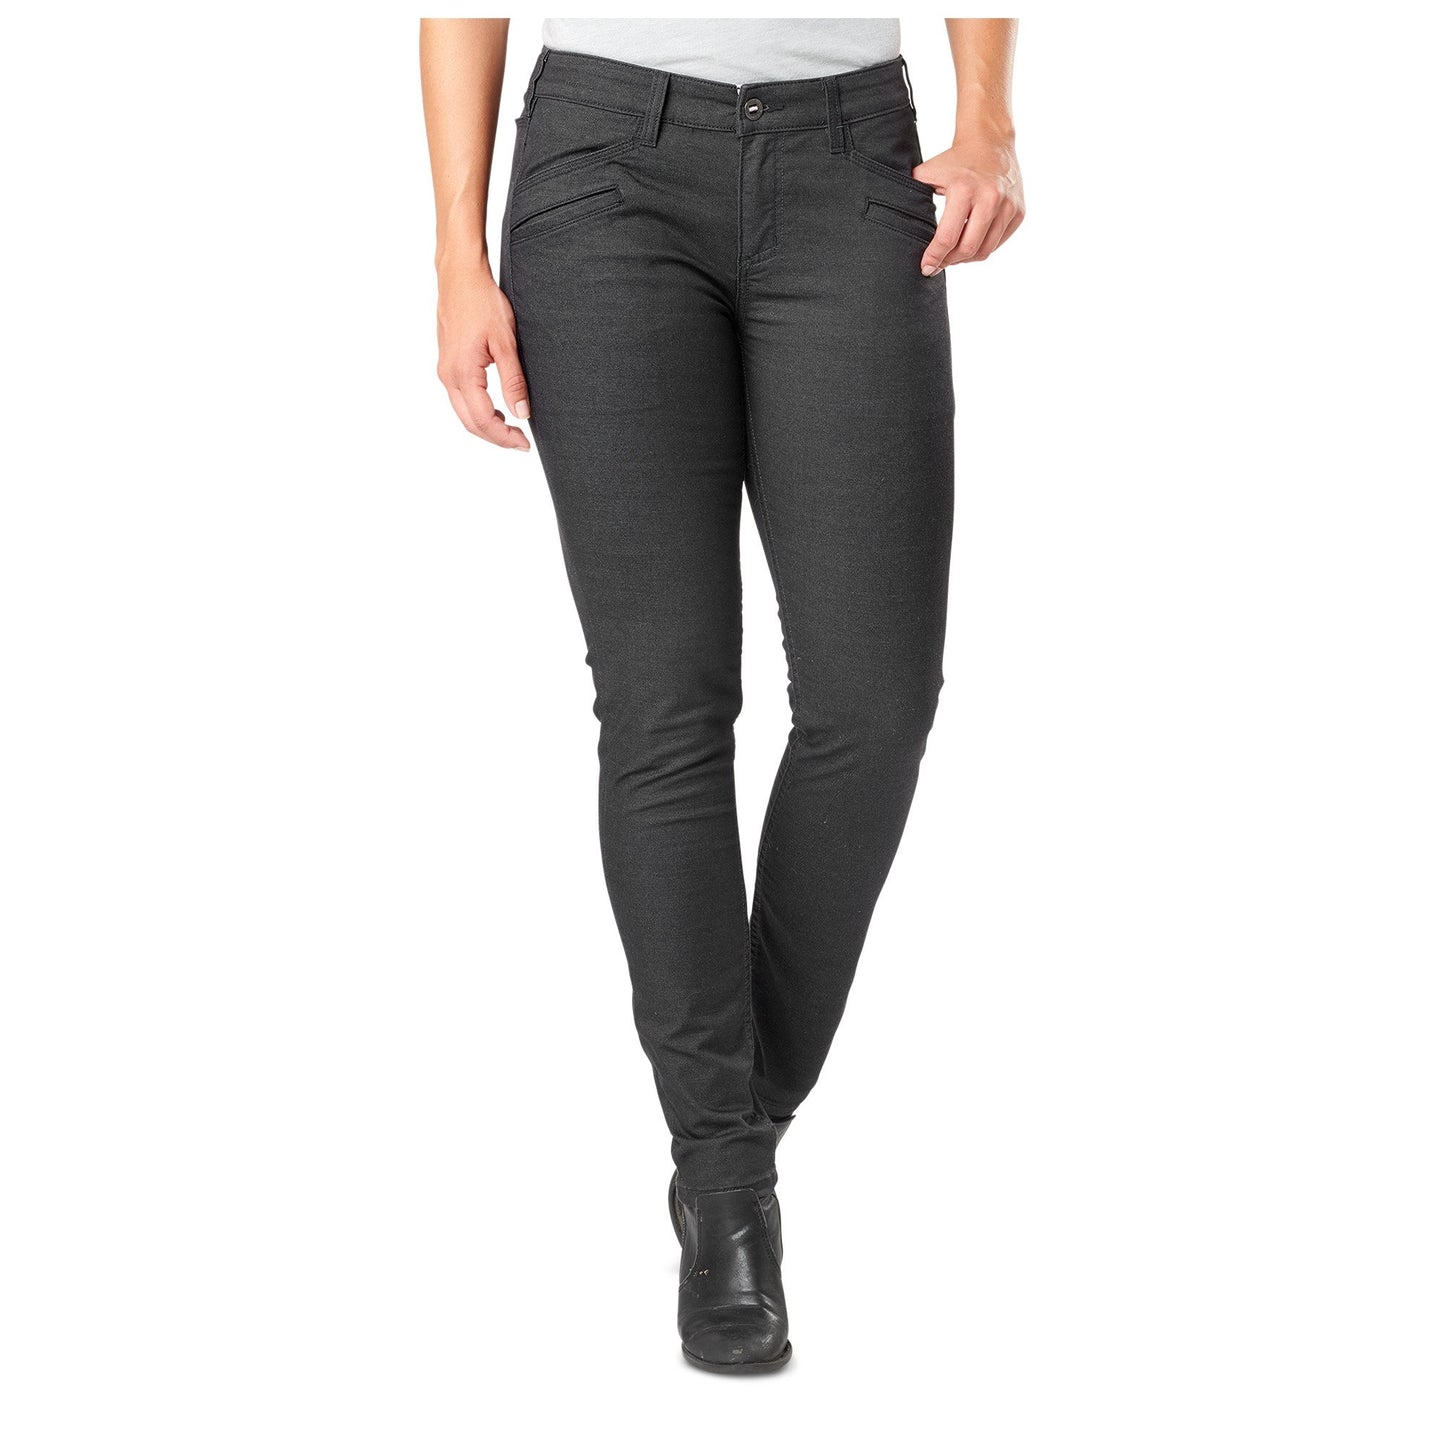 5.11 Tactical Women's Cavalry Twill Defender-Flex Slim Pants, Device Ready Pockets, Soft Fade Finish, Style 64415, Volcanic, 8-Long - Opticdeals